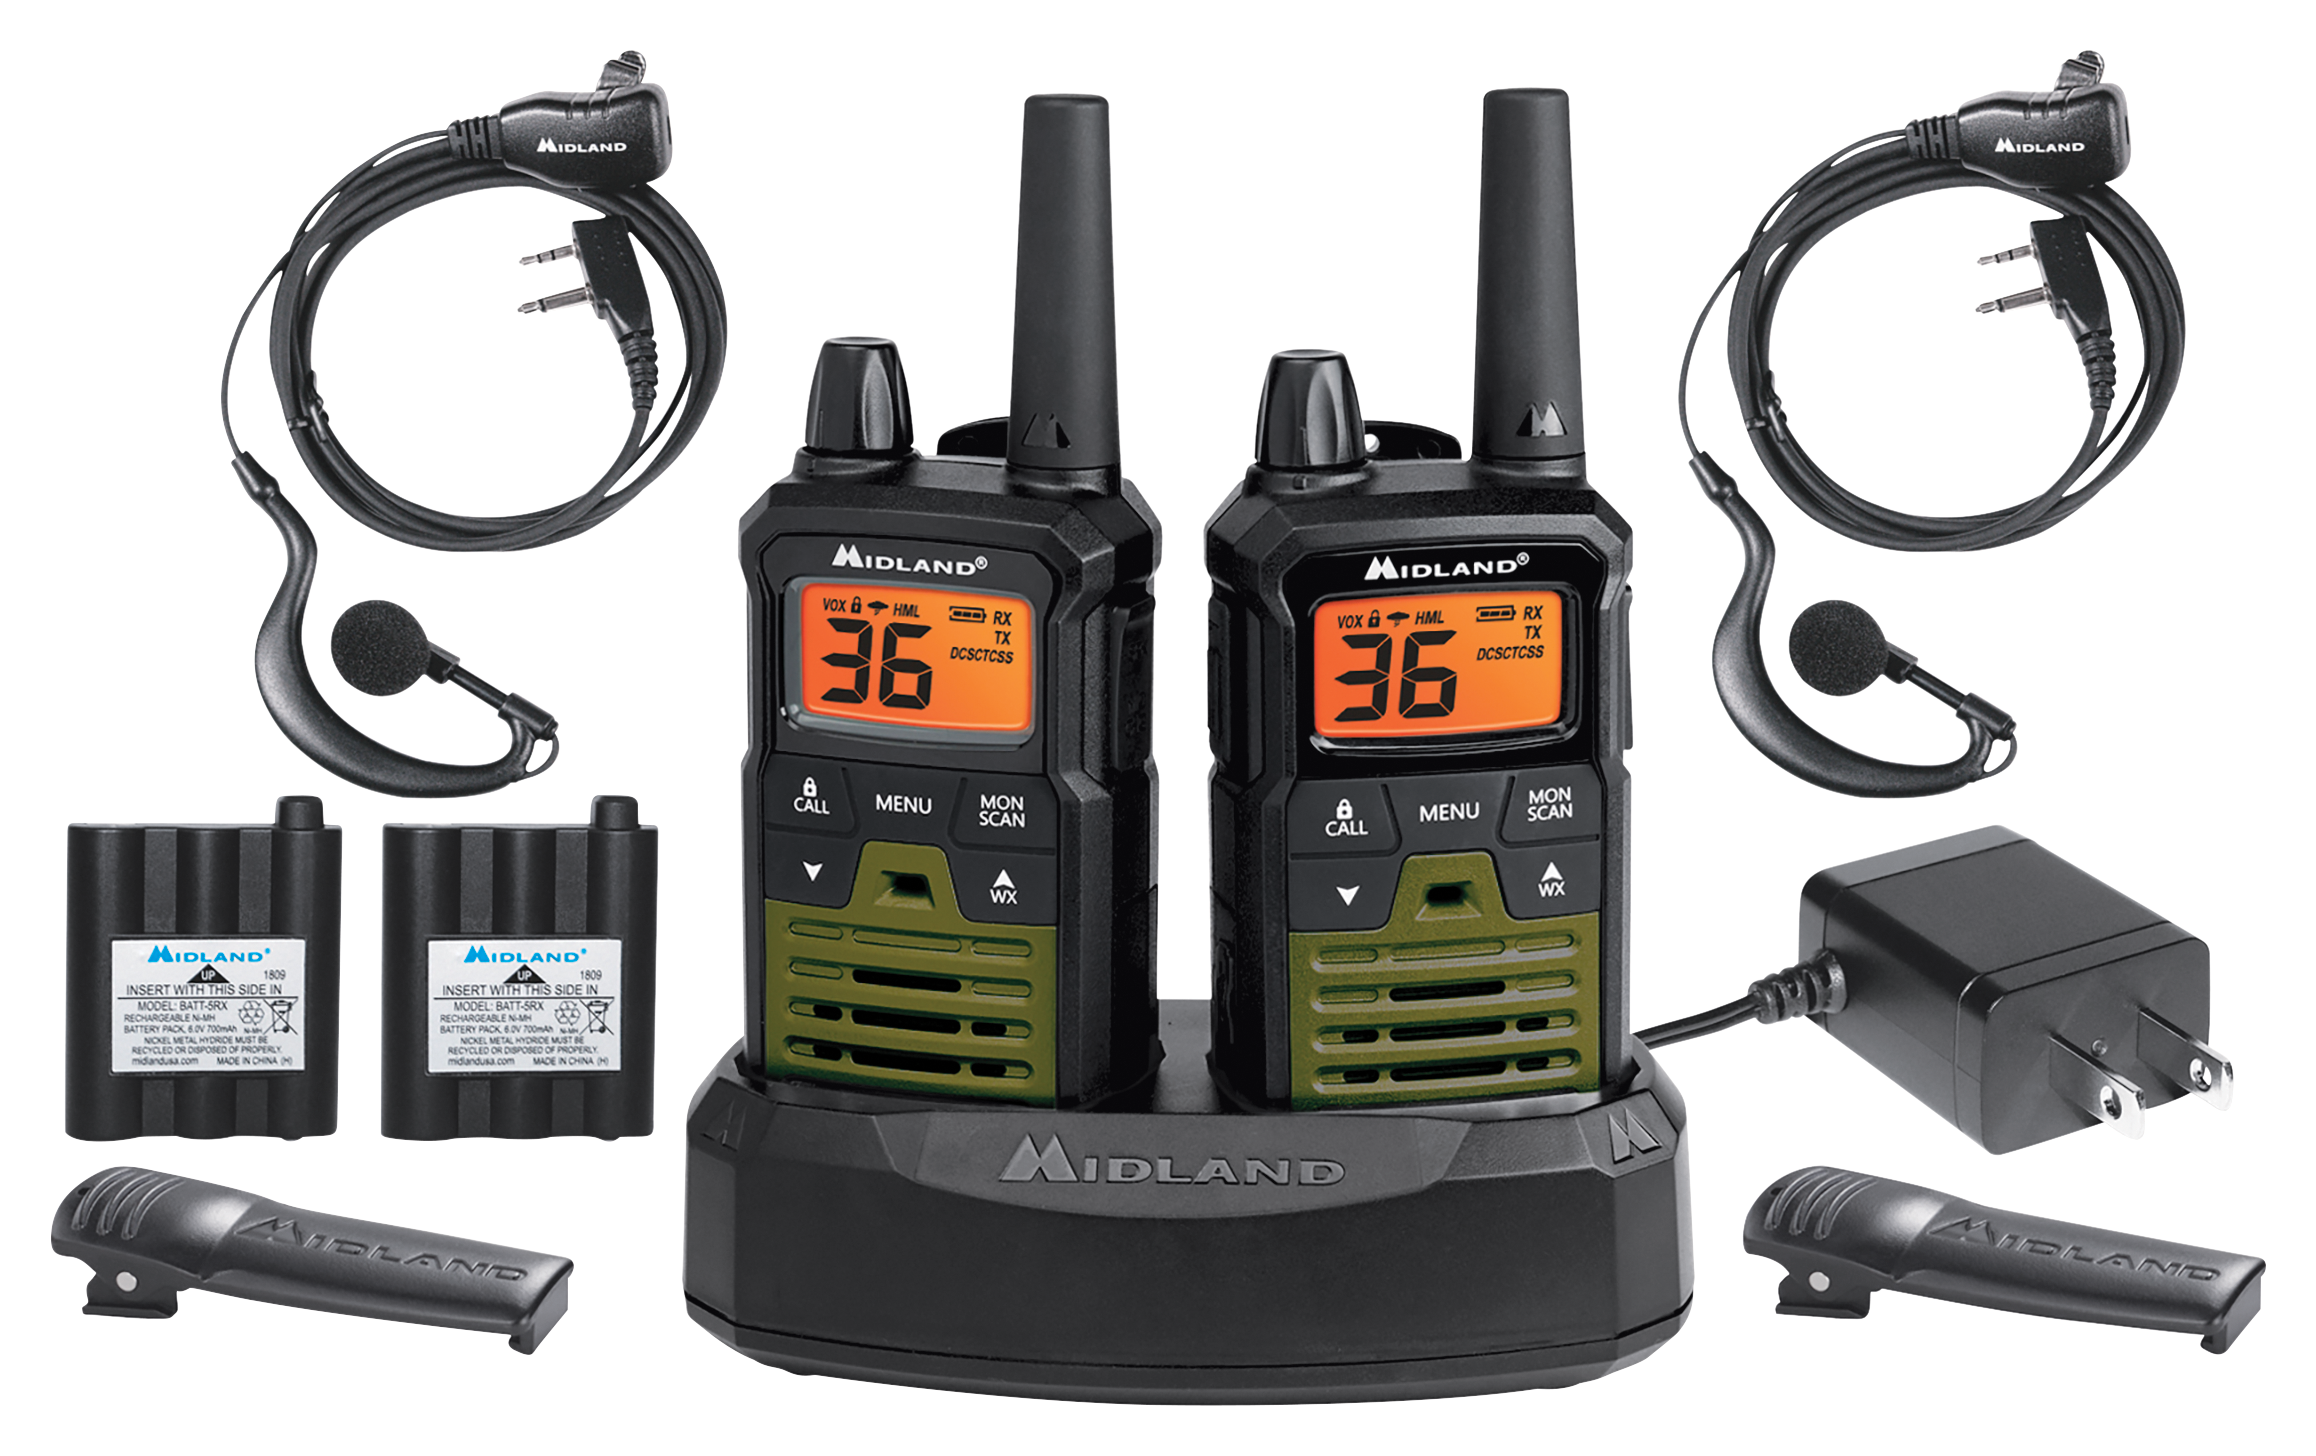 Midland X-TALKER T299VP4 Outfitter 2-Way Radio Pack Cabela's